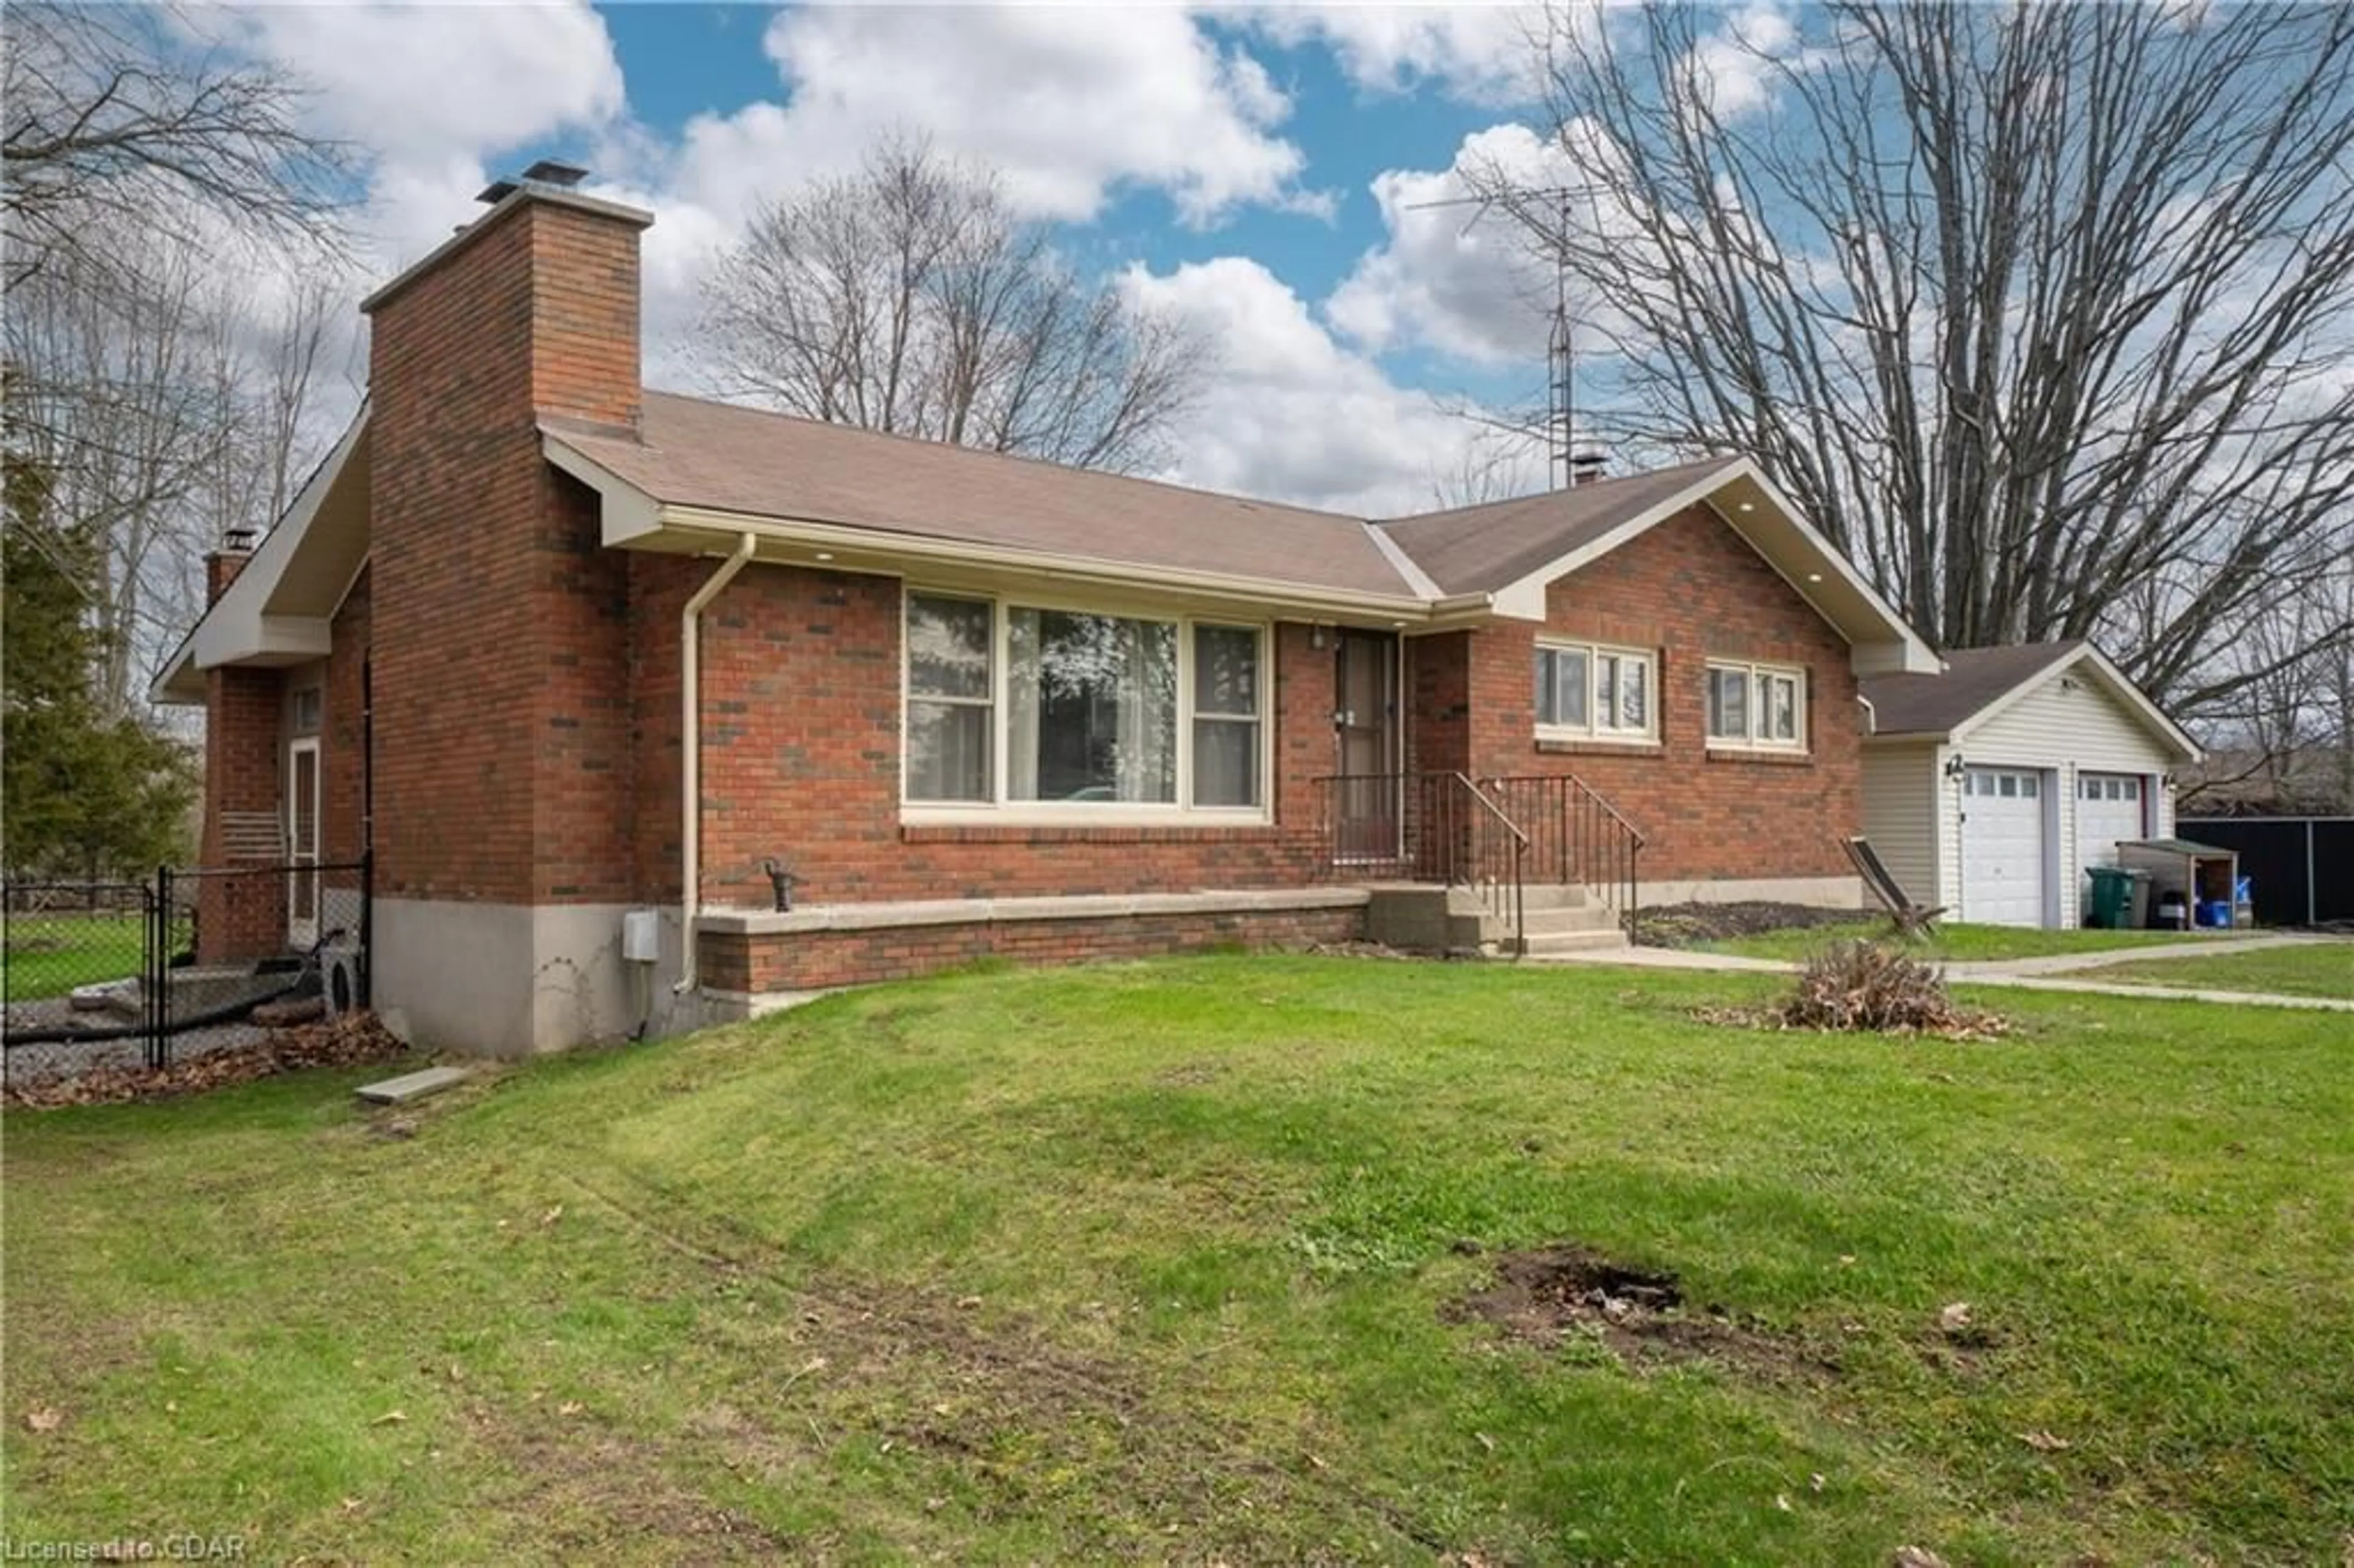 Home with brick exterior material for 2293 County Rd 64, Carrying Place Ontario K0K 1L0